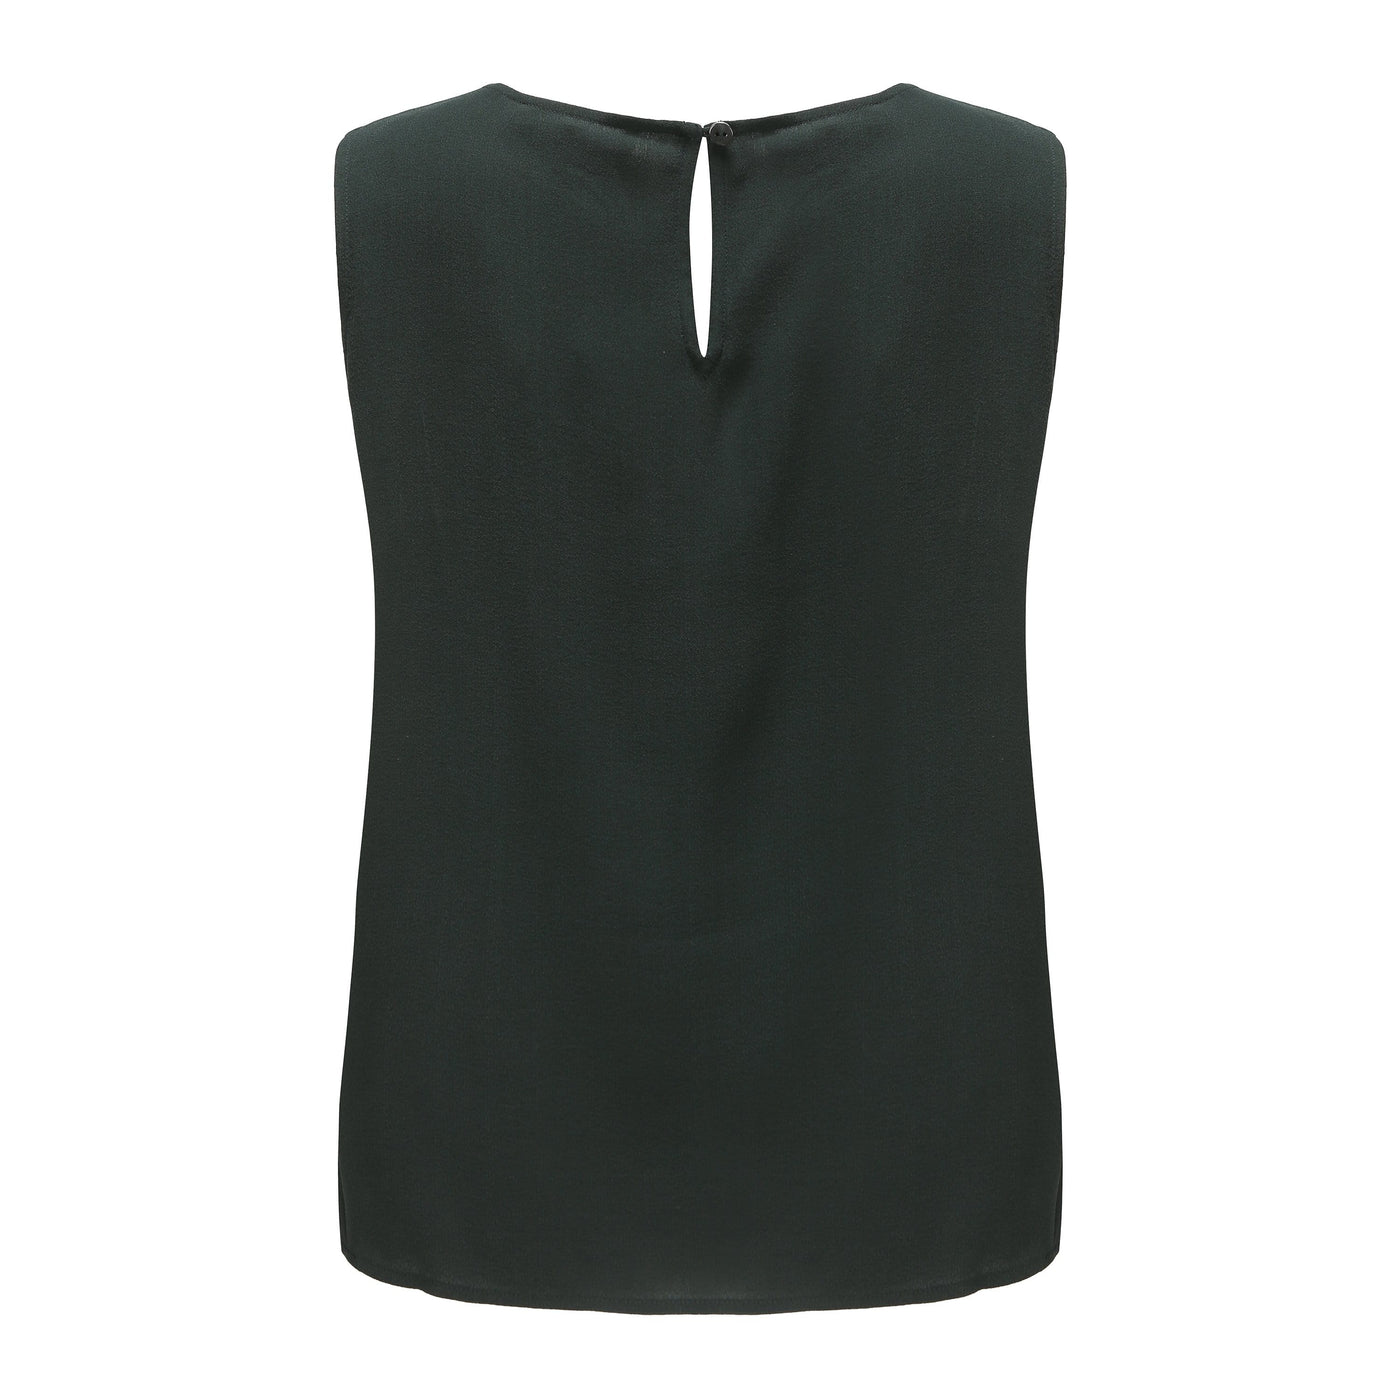 Lilly Pilly Collection bluesign® certified silk Lulu Tank in Bottle Green as 3D image showing back view